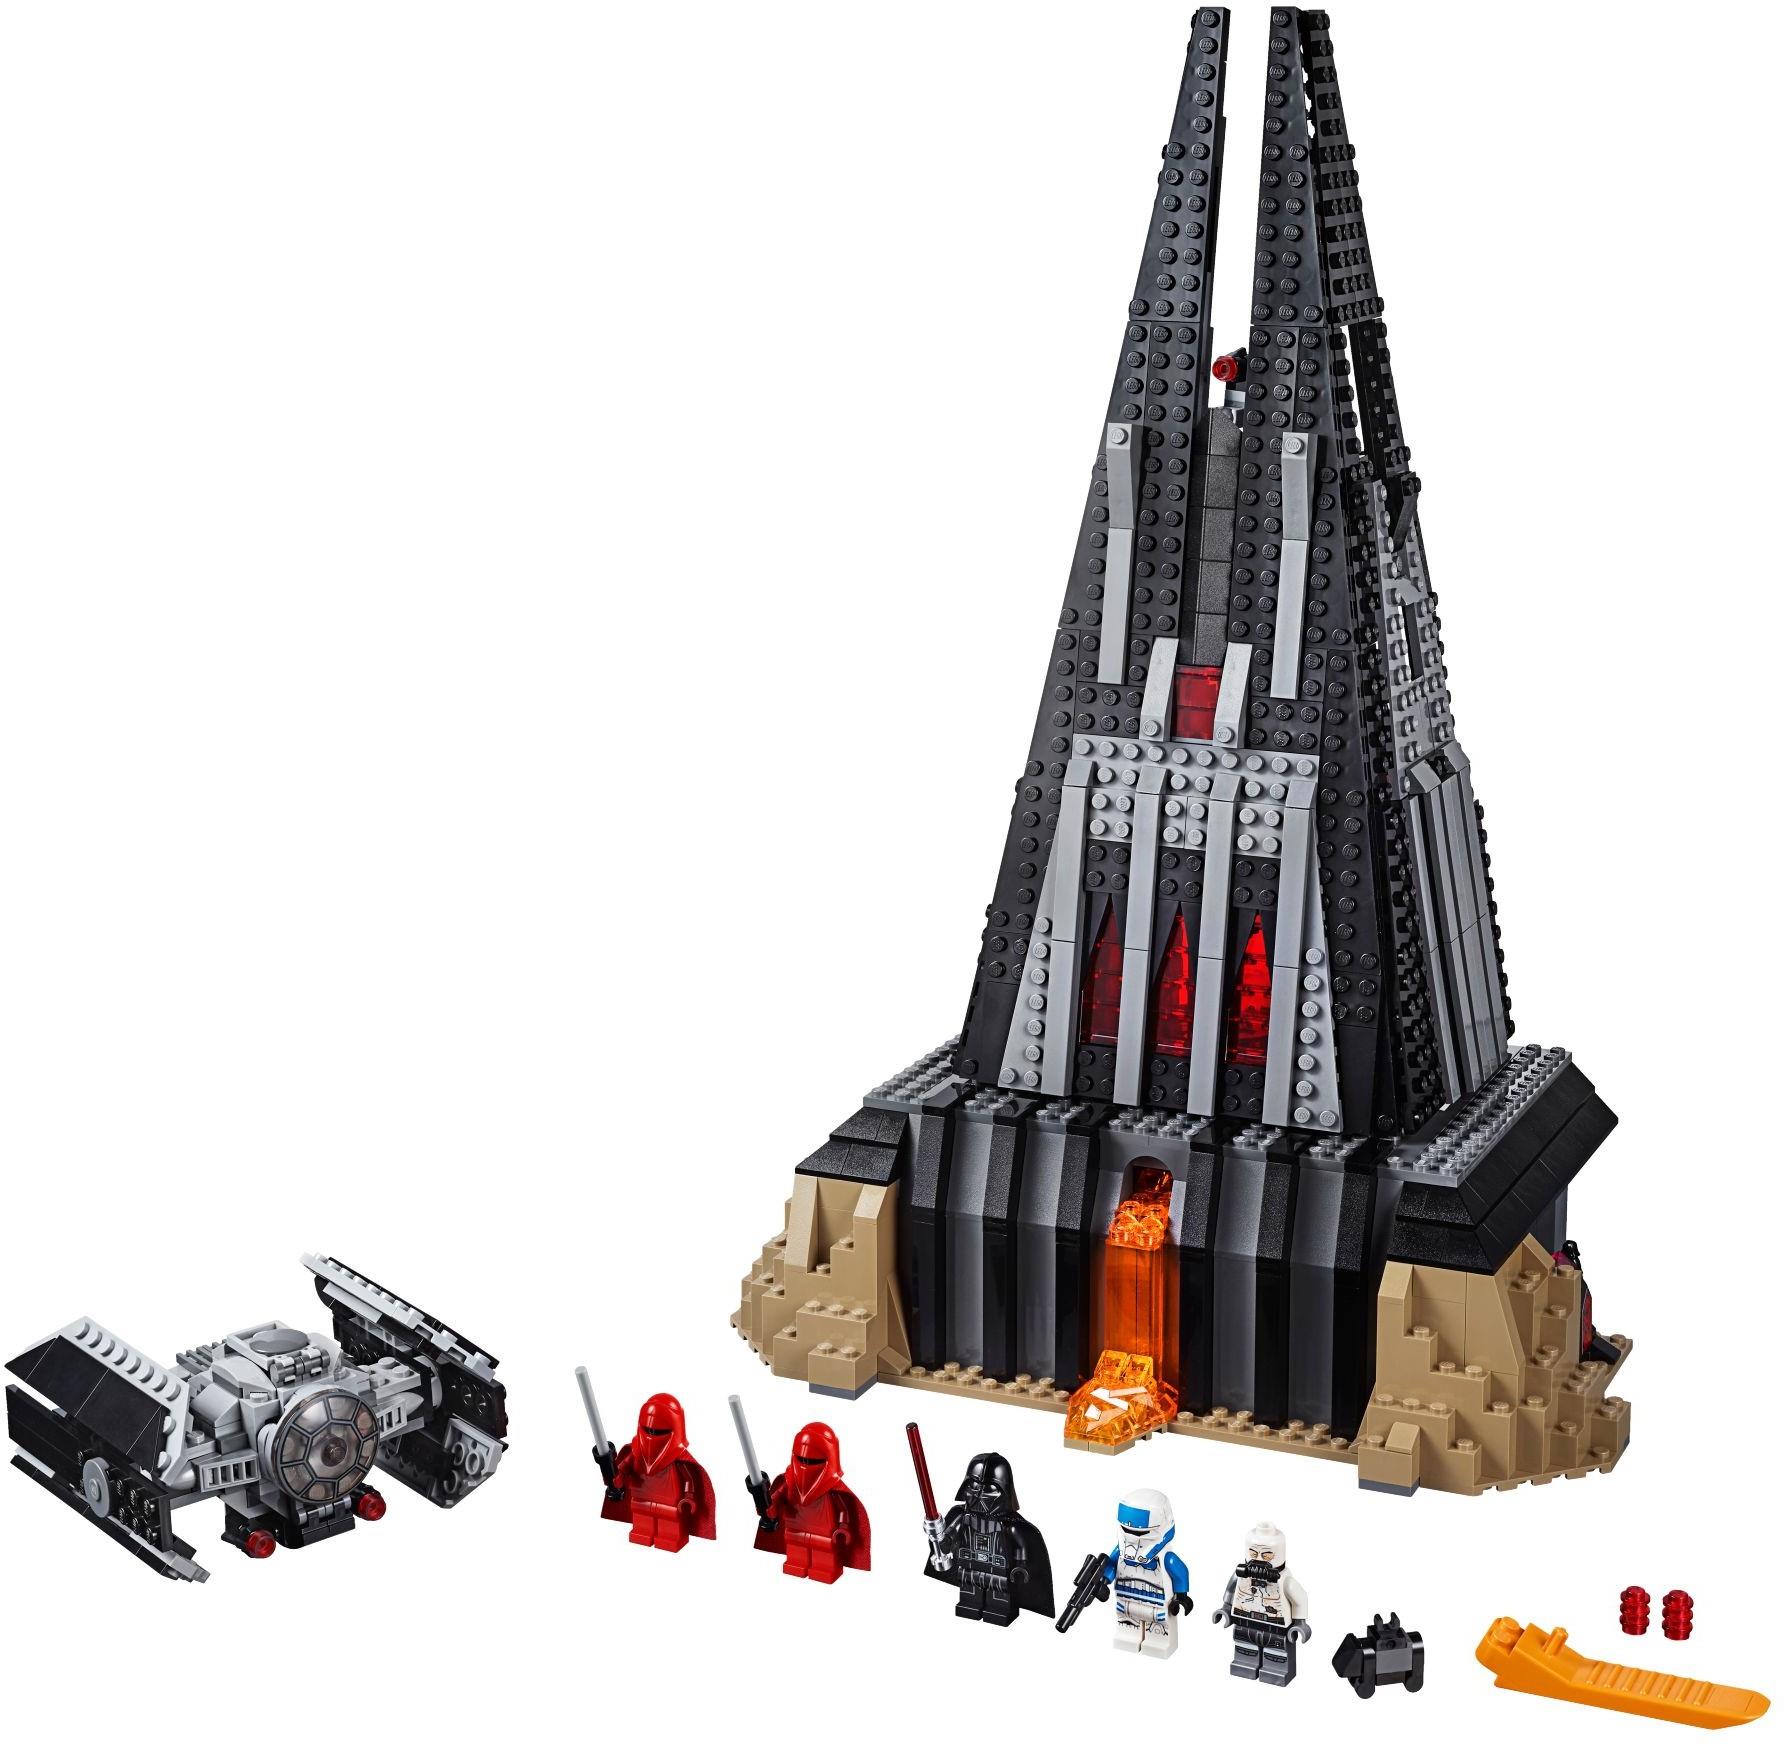 RETIRED Lego Star Wars Darth Vader’s Castle 75251-Free Immediate Shipping! 